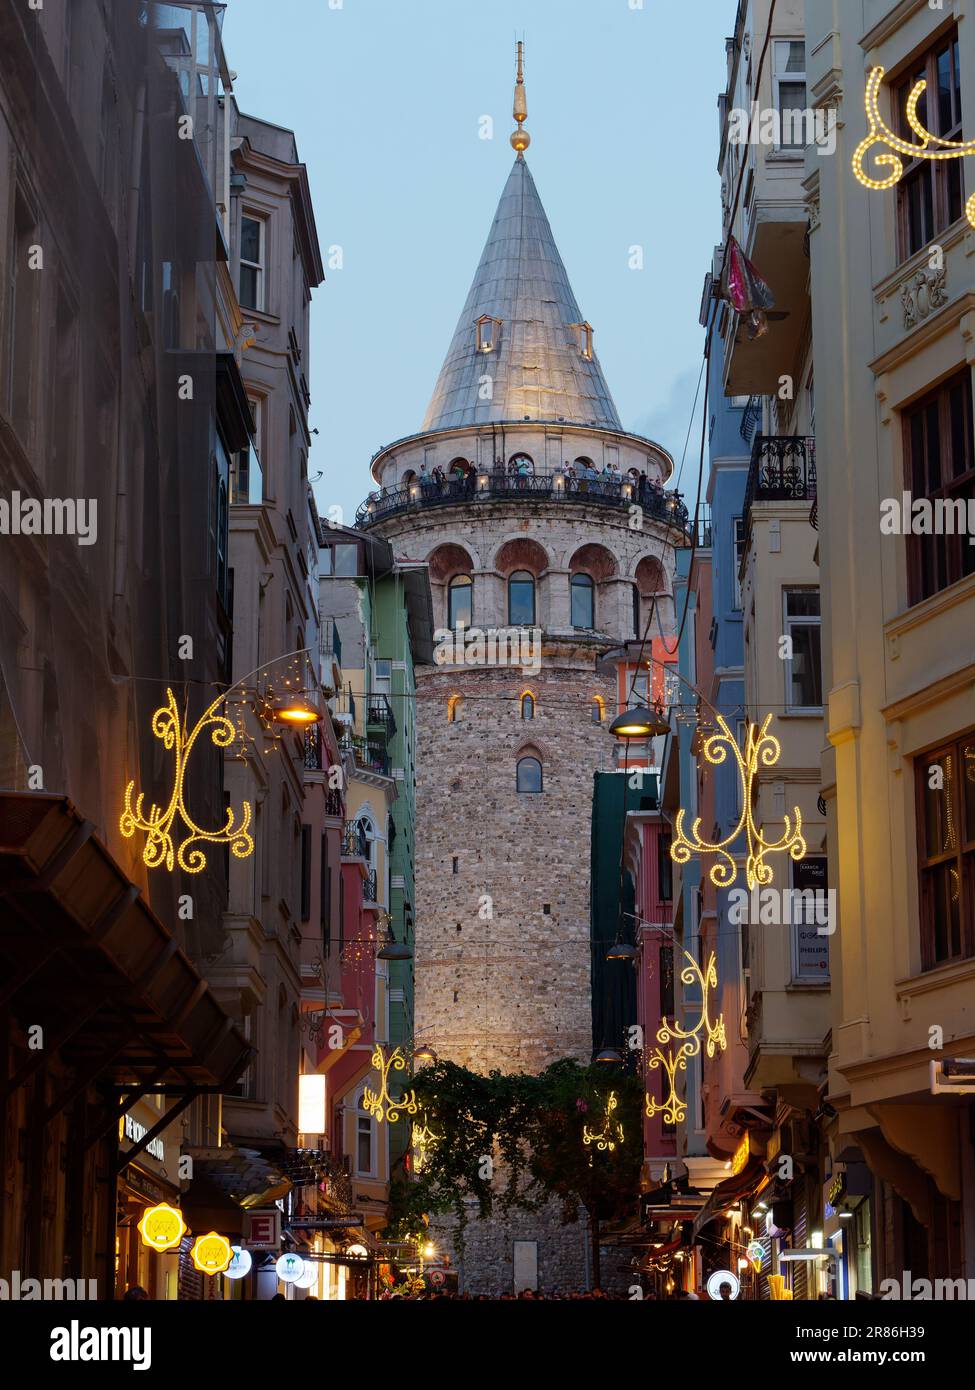 People enjoying the view from the Galata Tower in the evening in Istanbul, Turkey Stock Photo